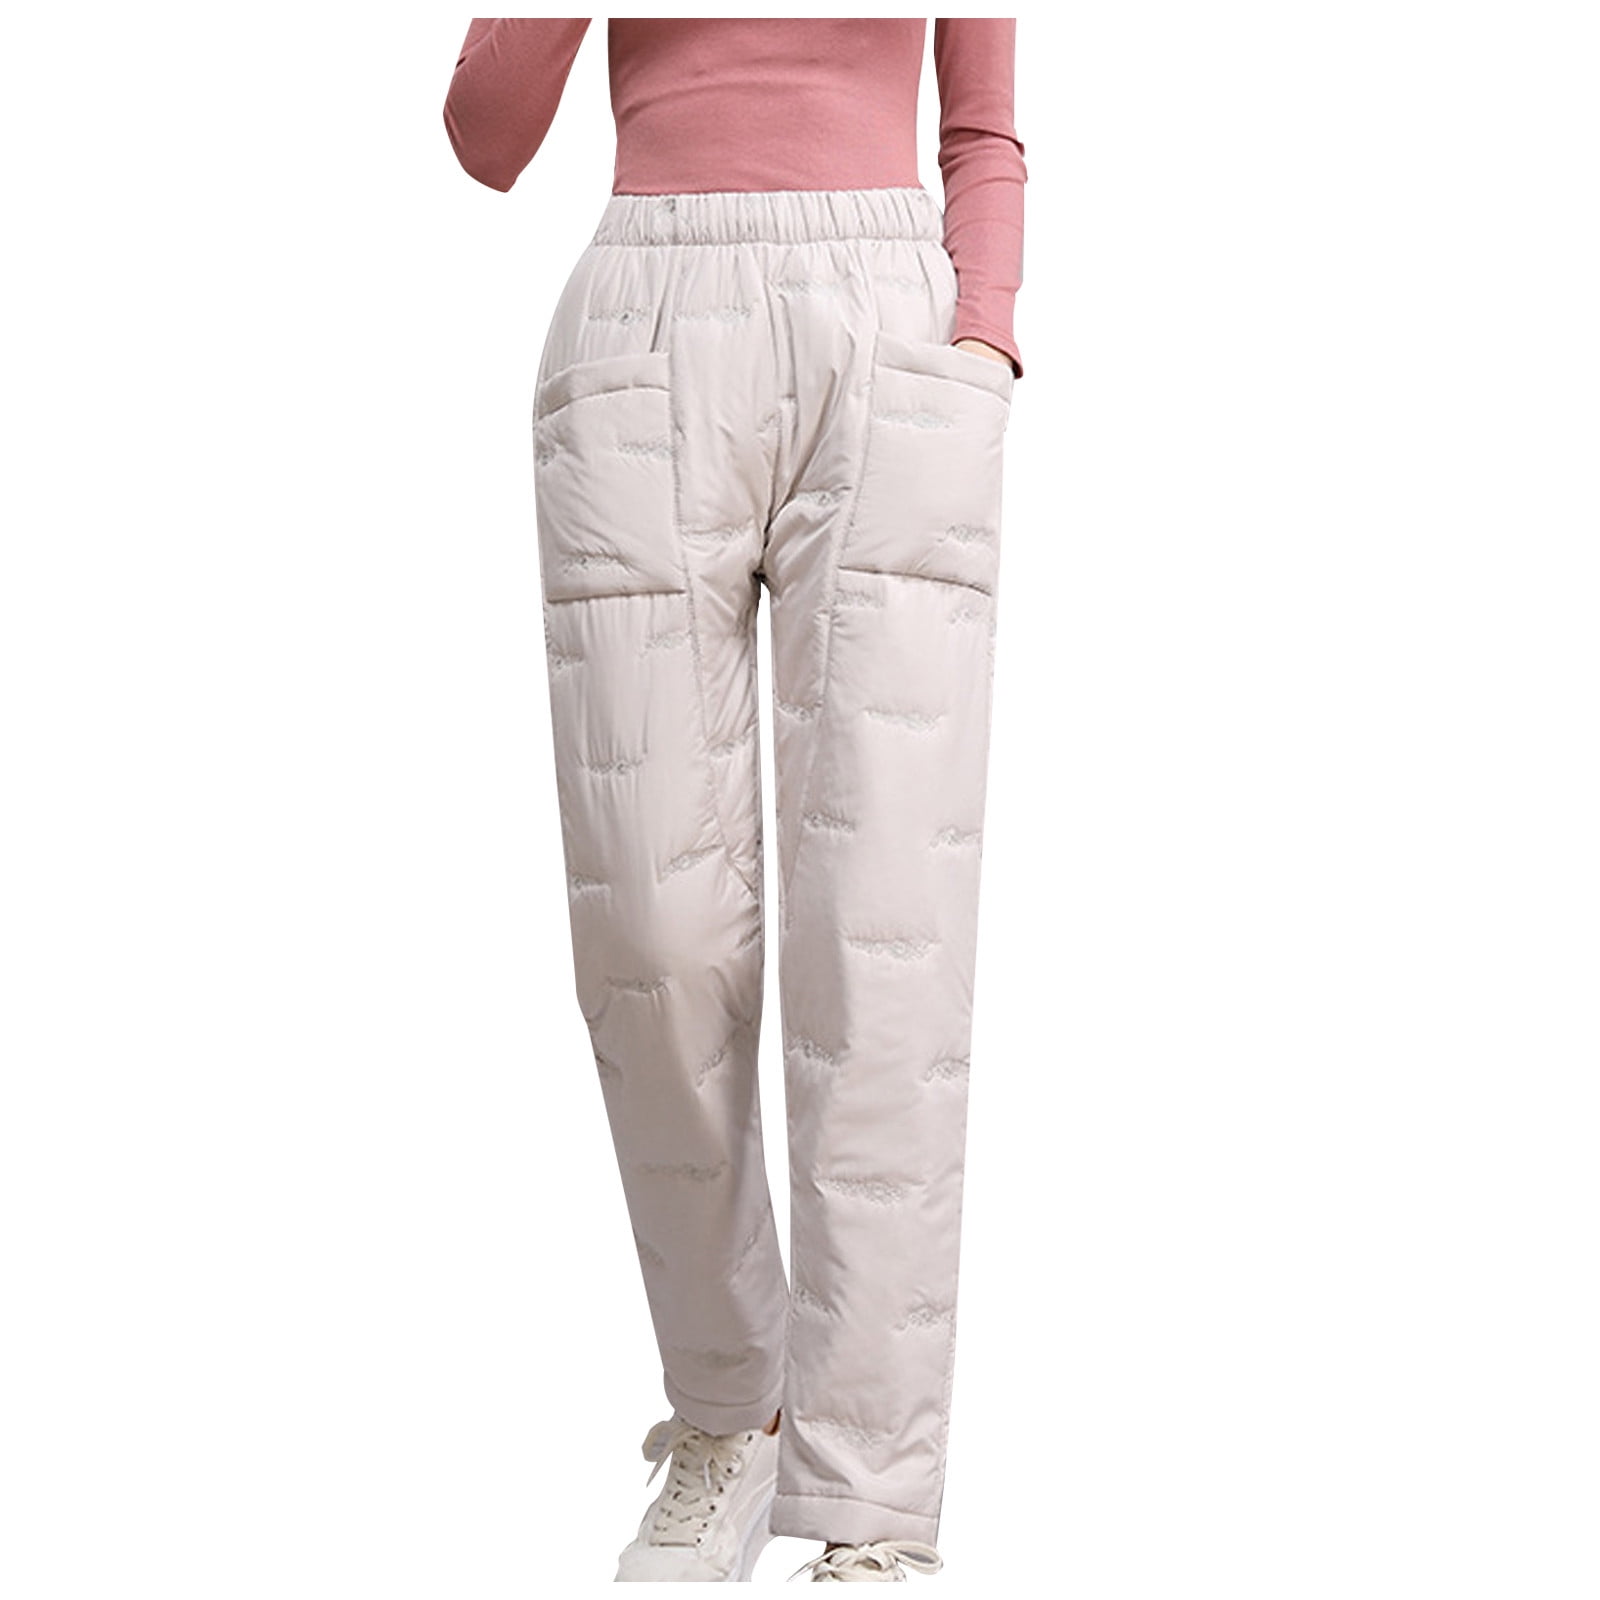 KIJBLAE Women's Bottoms Fashion Full Length Trousers Straight Leg Pants For  Girls Solid Color Comfy Lounge Casual Pants White XL - Walmart.com